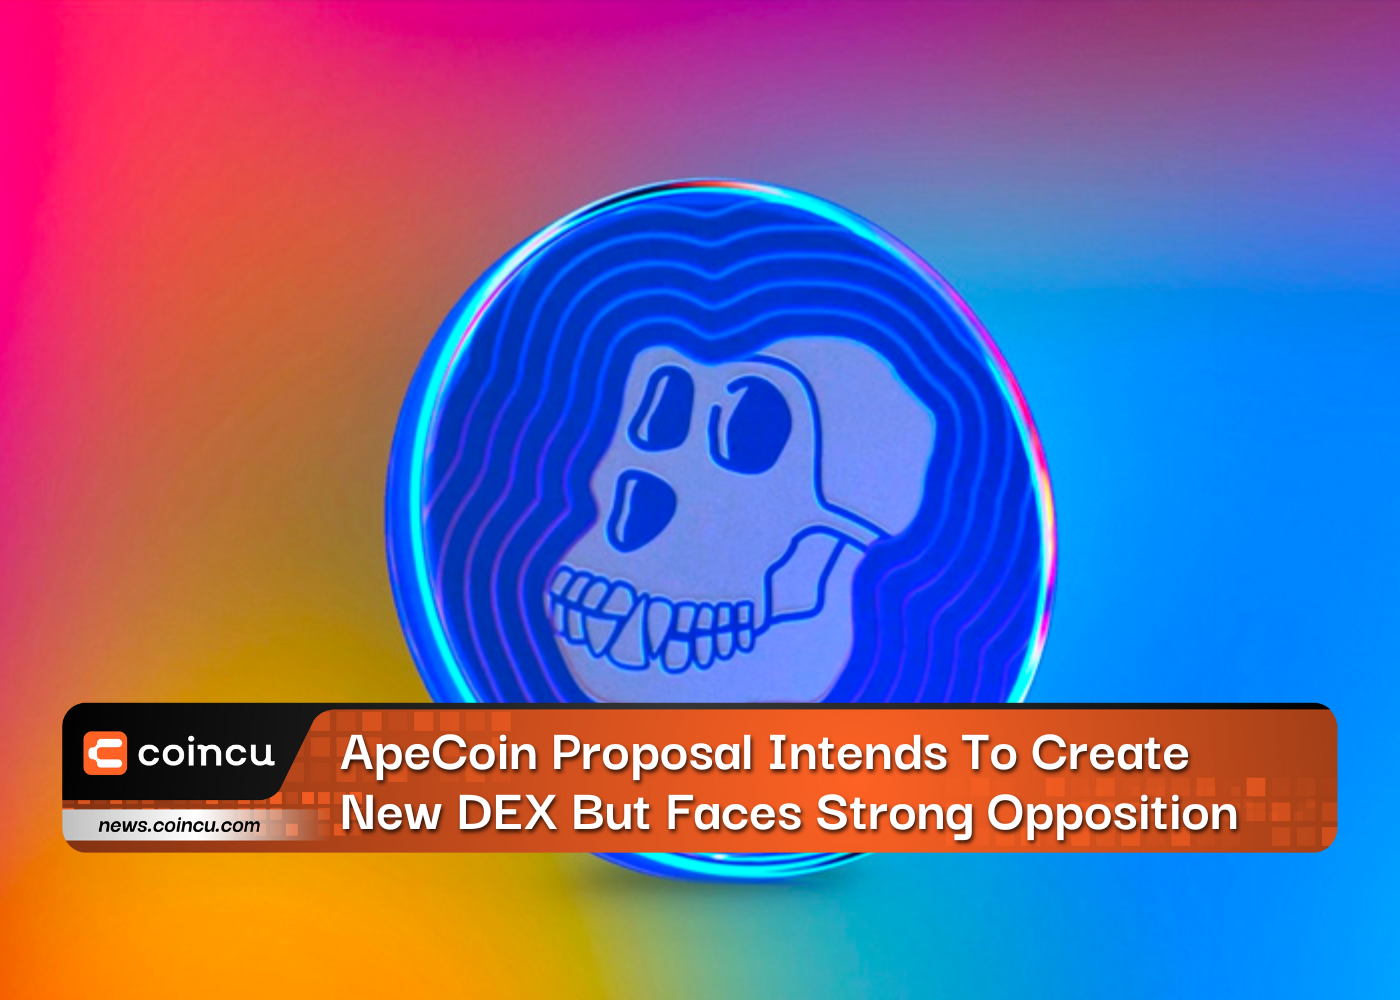 ApeCoin Proposal Intends To Create New DEX But Faces Strong Opposition